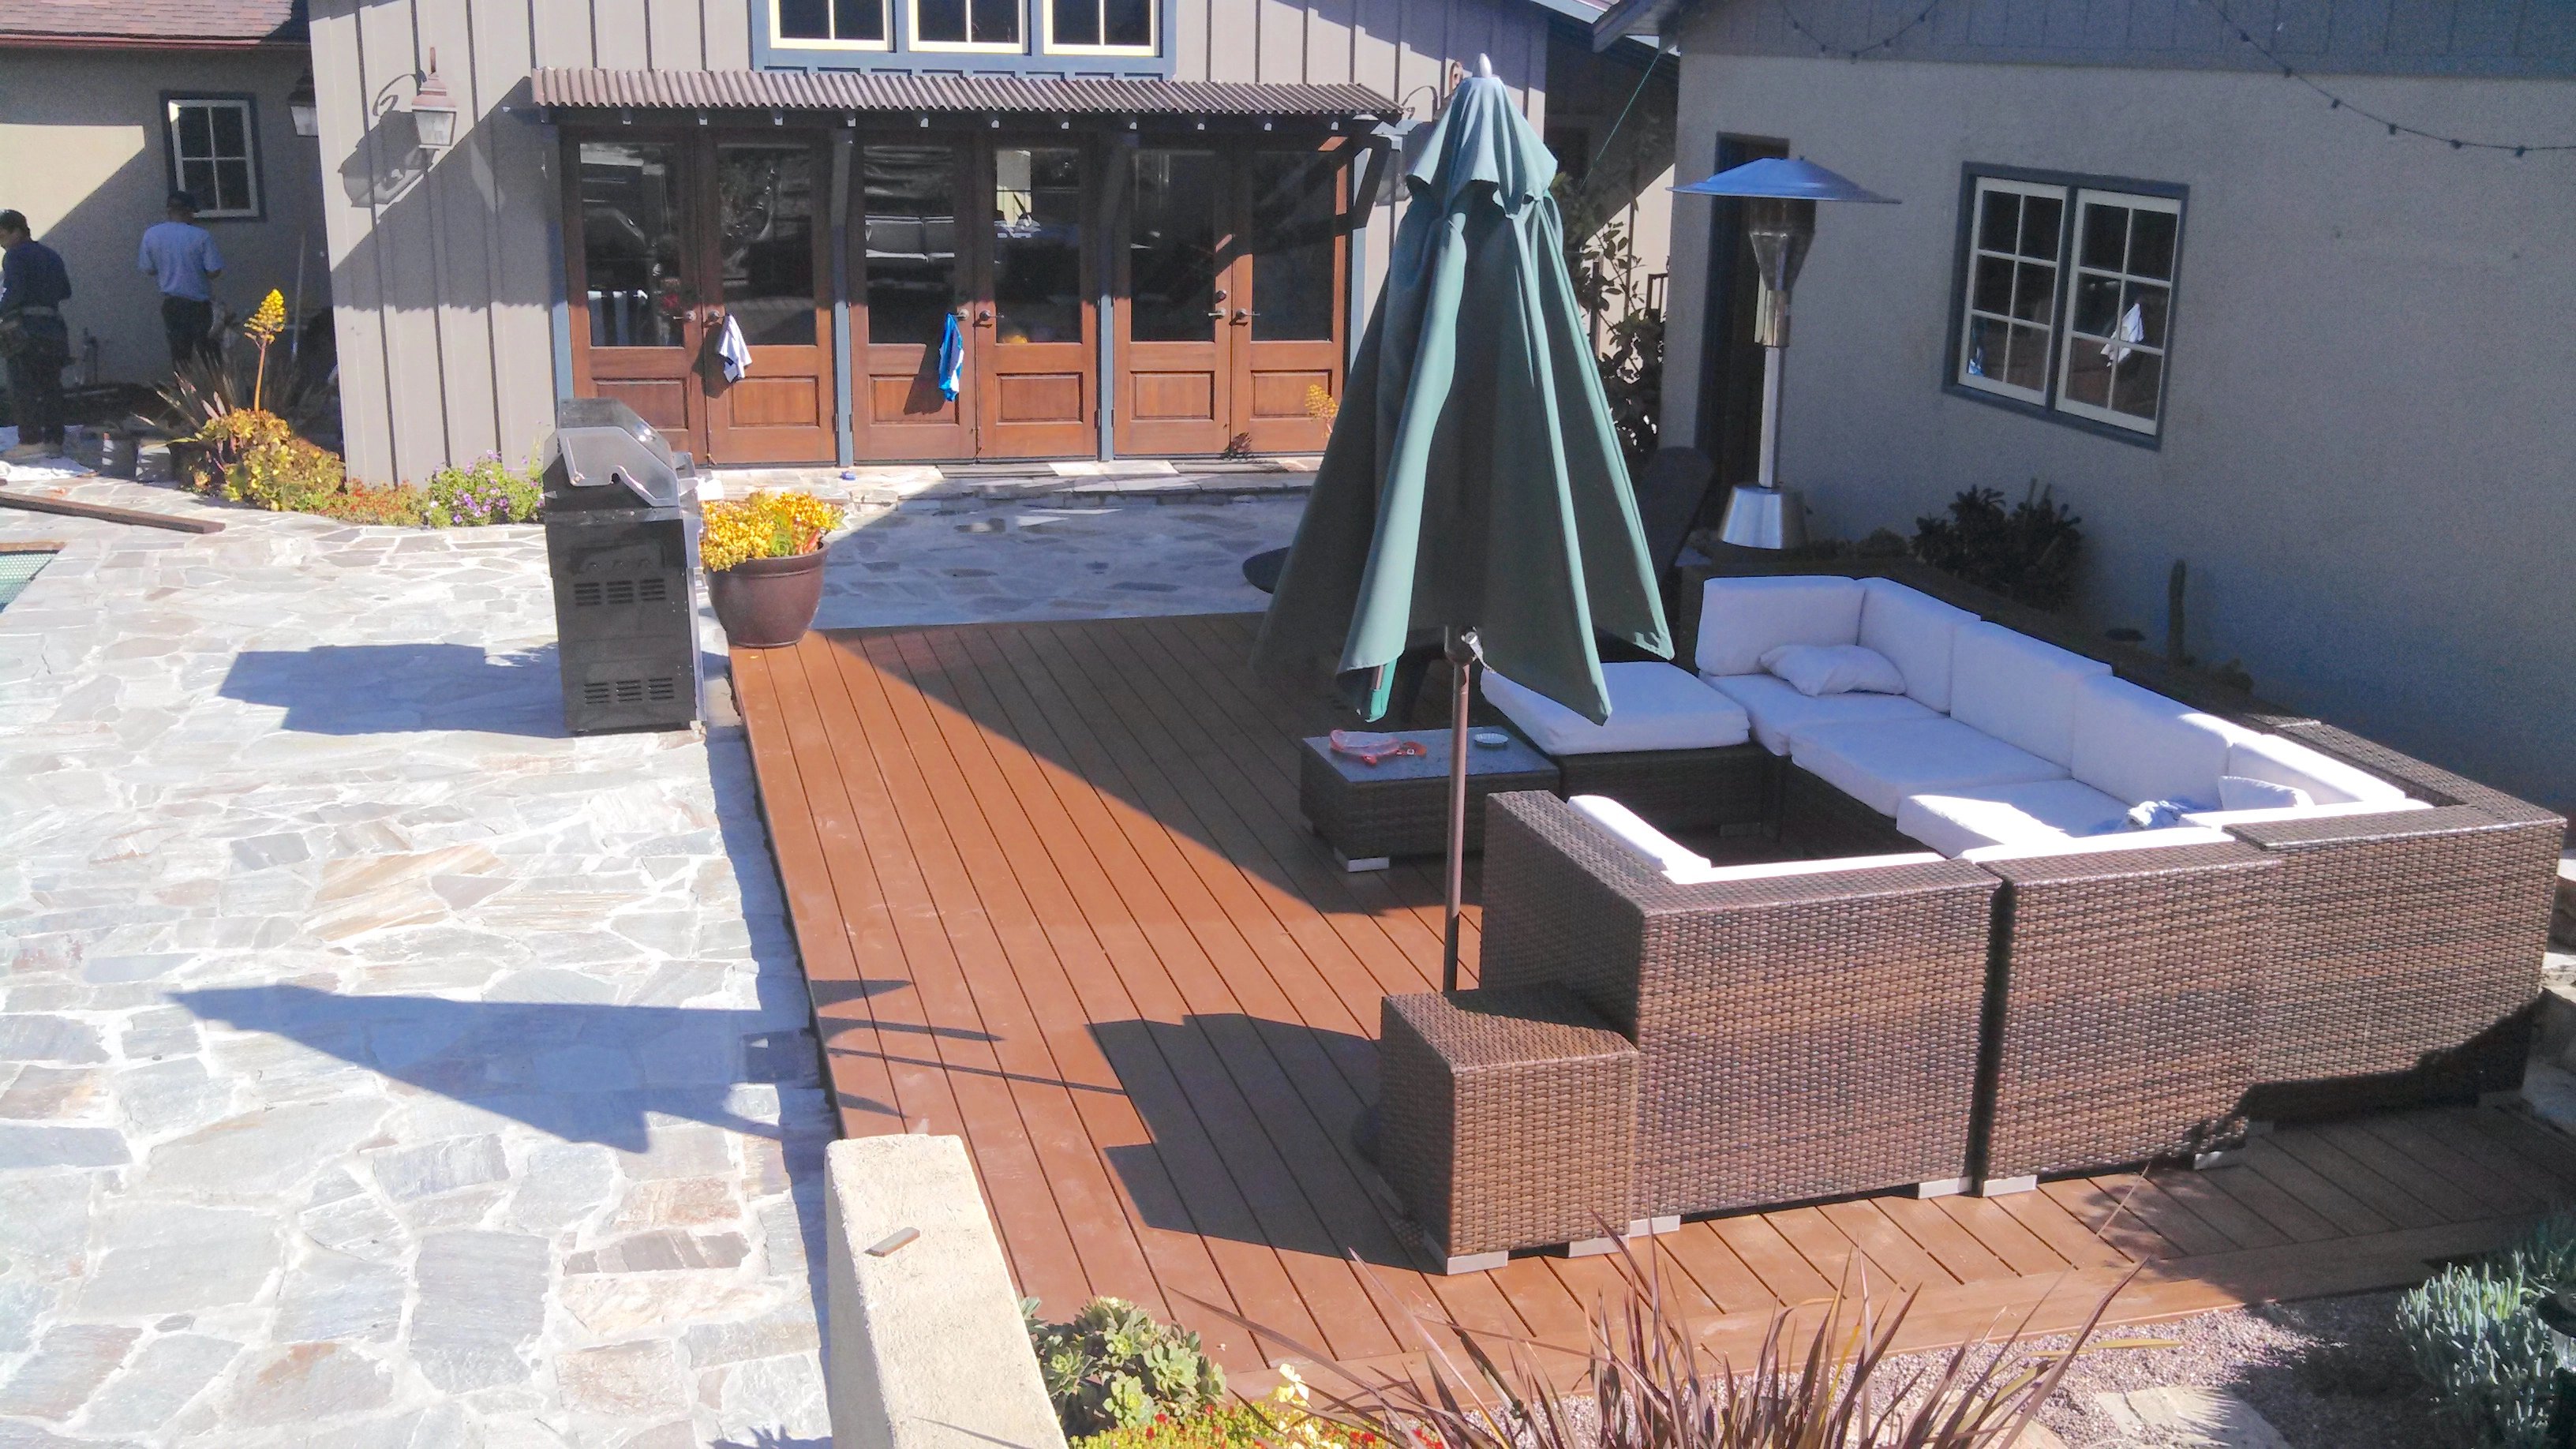 A ground level custom trex composite deck installed poolside for durability. 